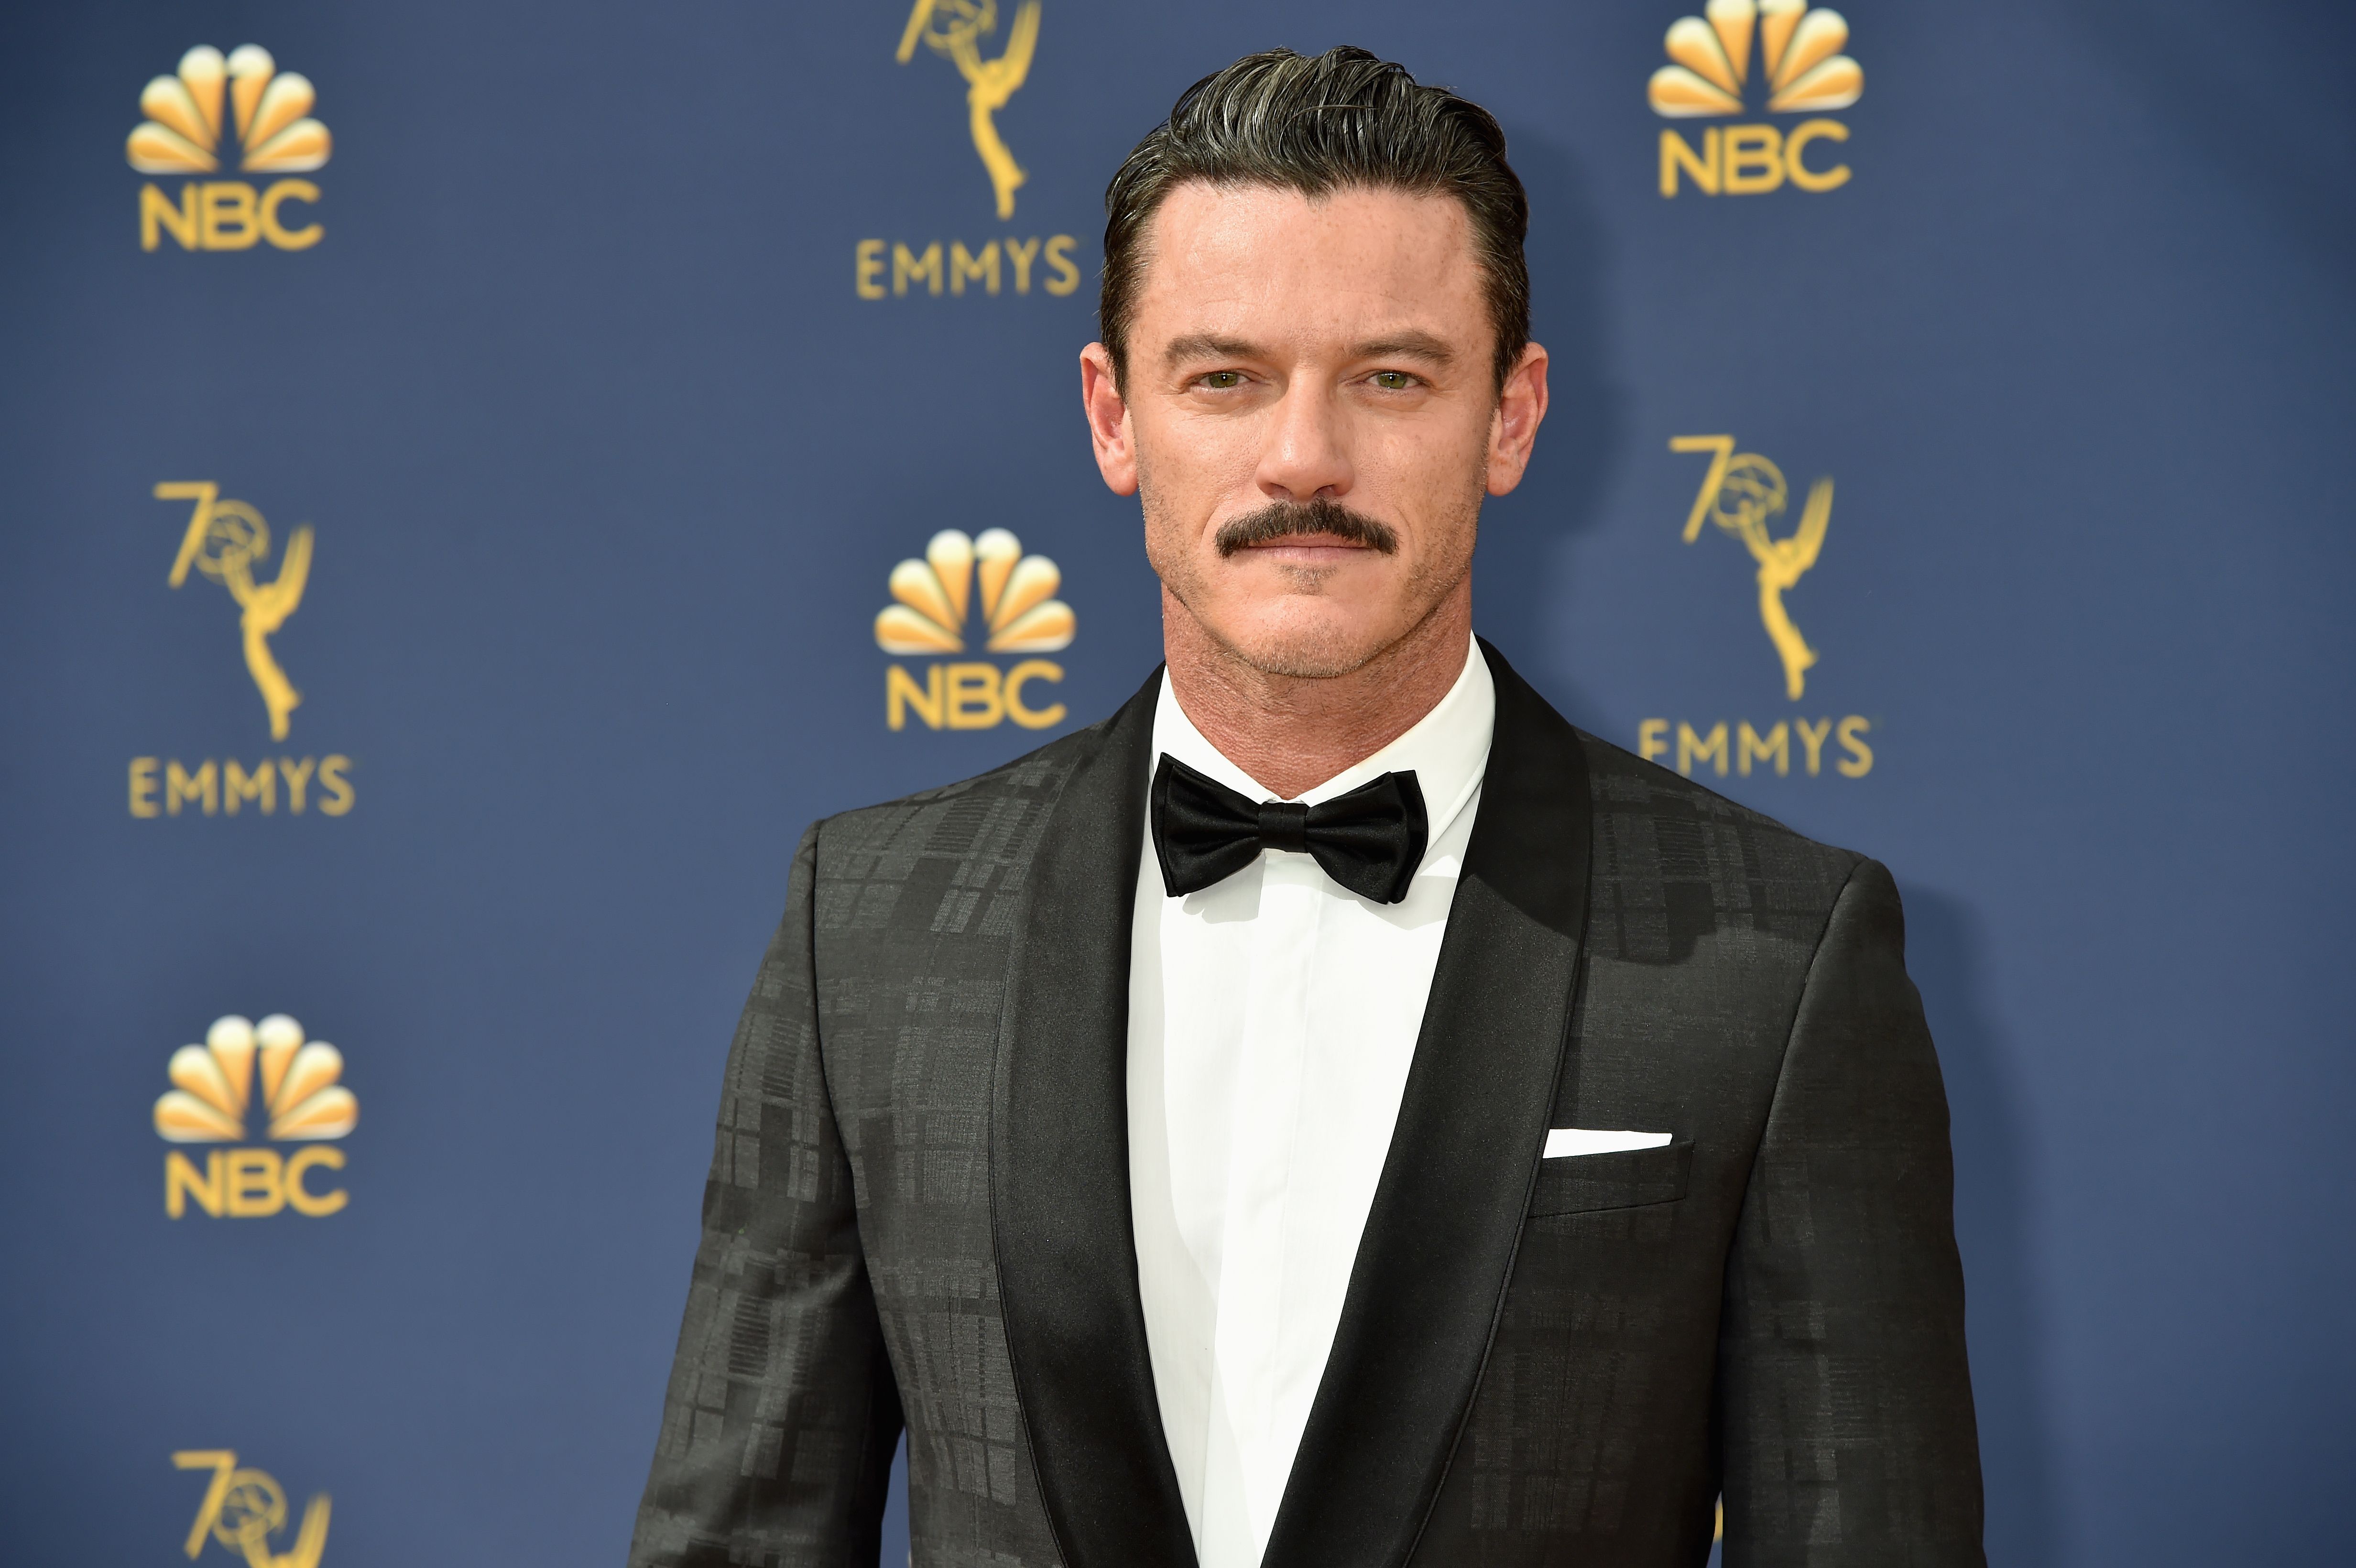  Luke Evans attends the 70th Emmy Awards at Microsoft Theater on September 17, 2018 in Los Angeles, California. | Photo: Getty Images